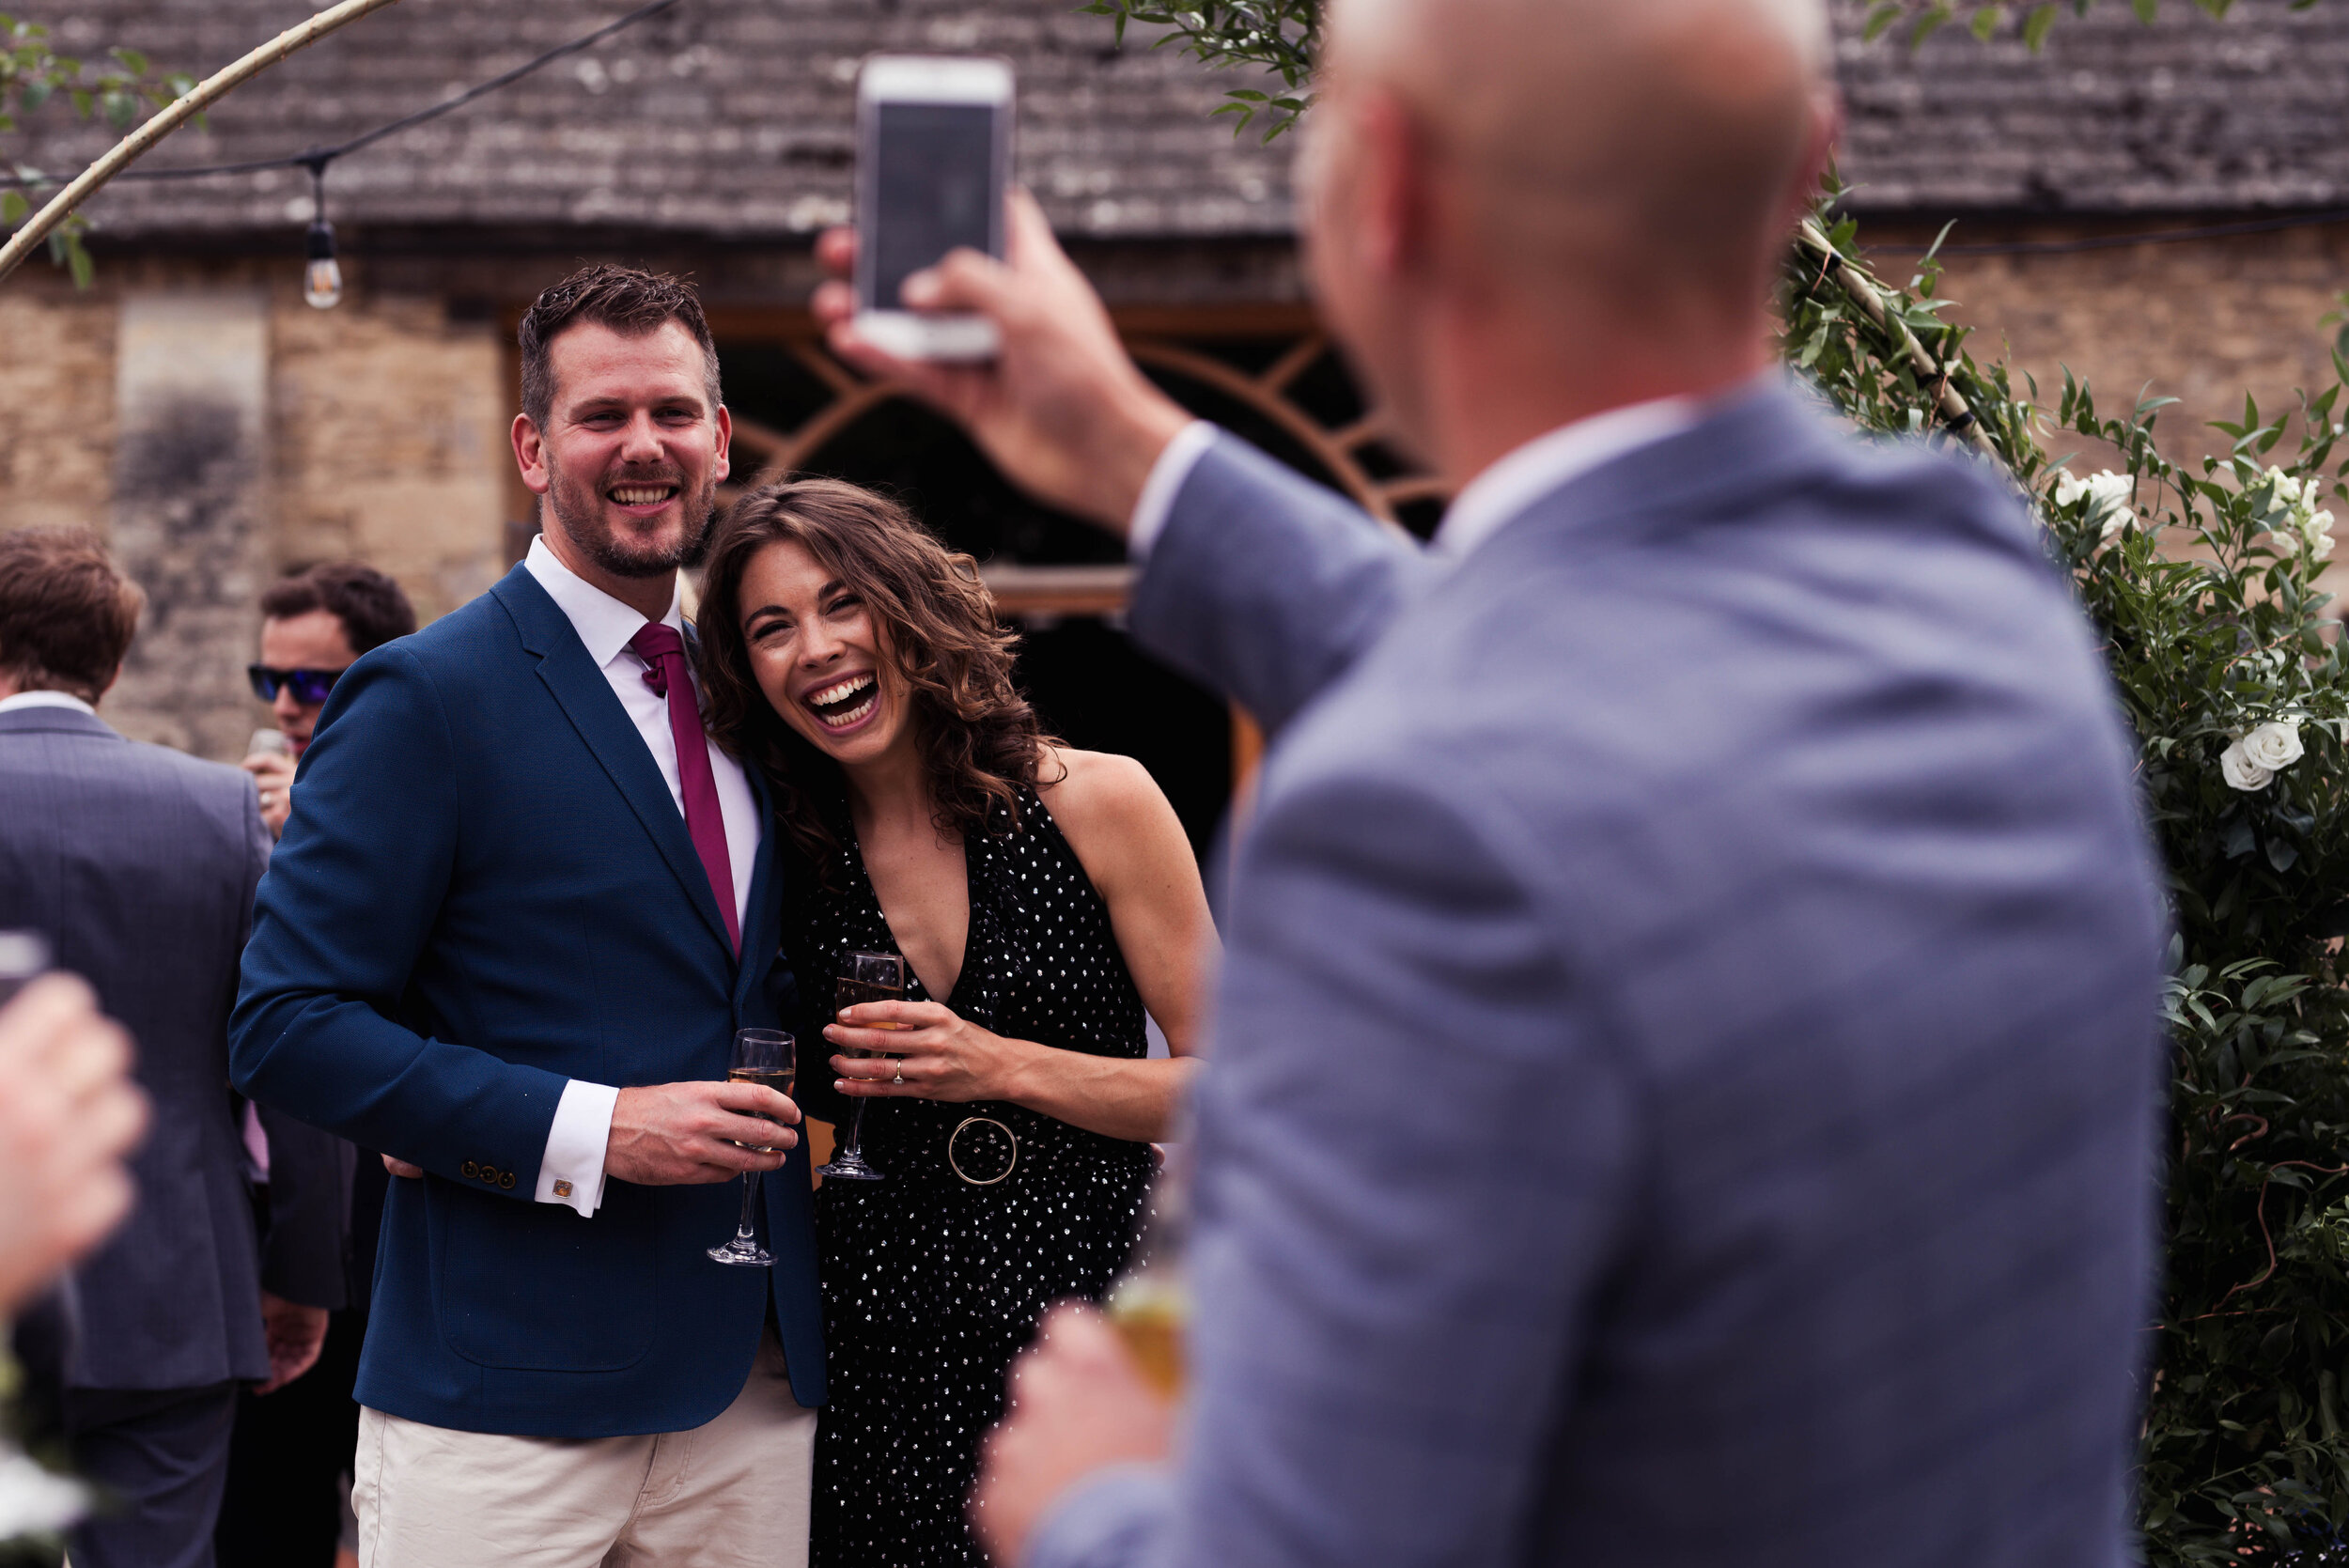 A male wedding guest takes a photo of another two guests